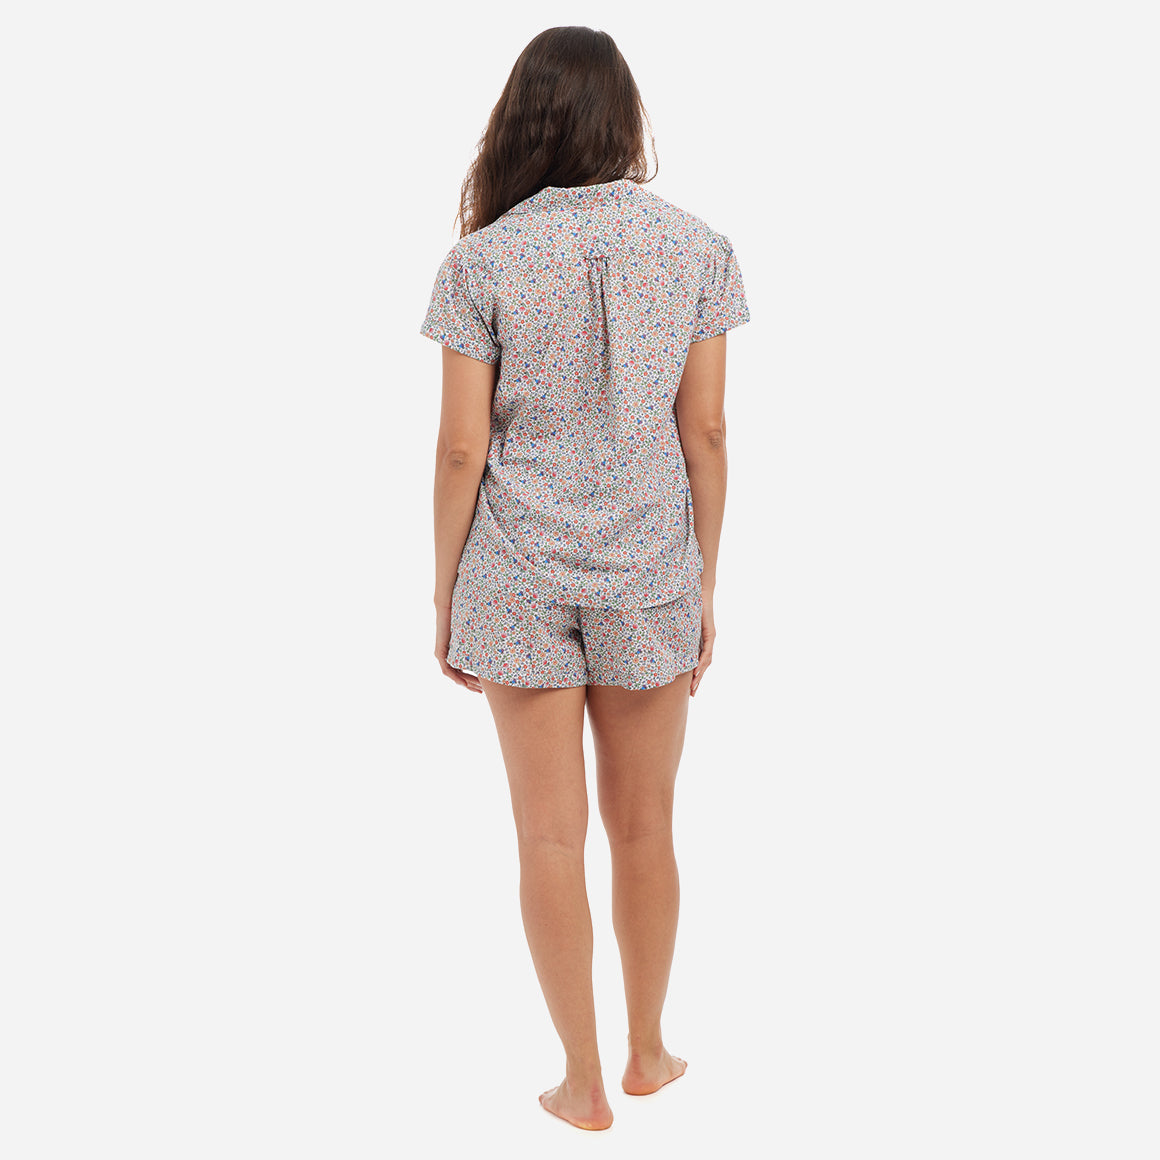 Our short sleeve pajama set features a relaxed fit, providing you with a comfortable and stylish option for warmer weather. The pajama set includes a classic button-up top with a collar, while the matching shorts feature a comfortable elastic waistband, drawstring, and side-seam pockets. The short sleeves offer extra breathability and coverage for warmer evenings.